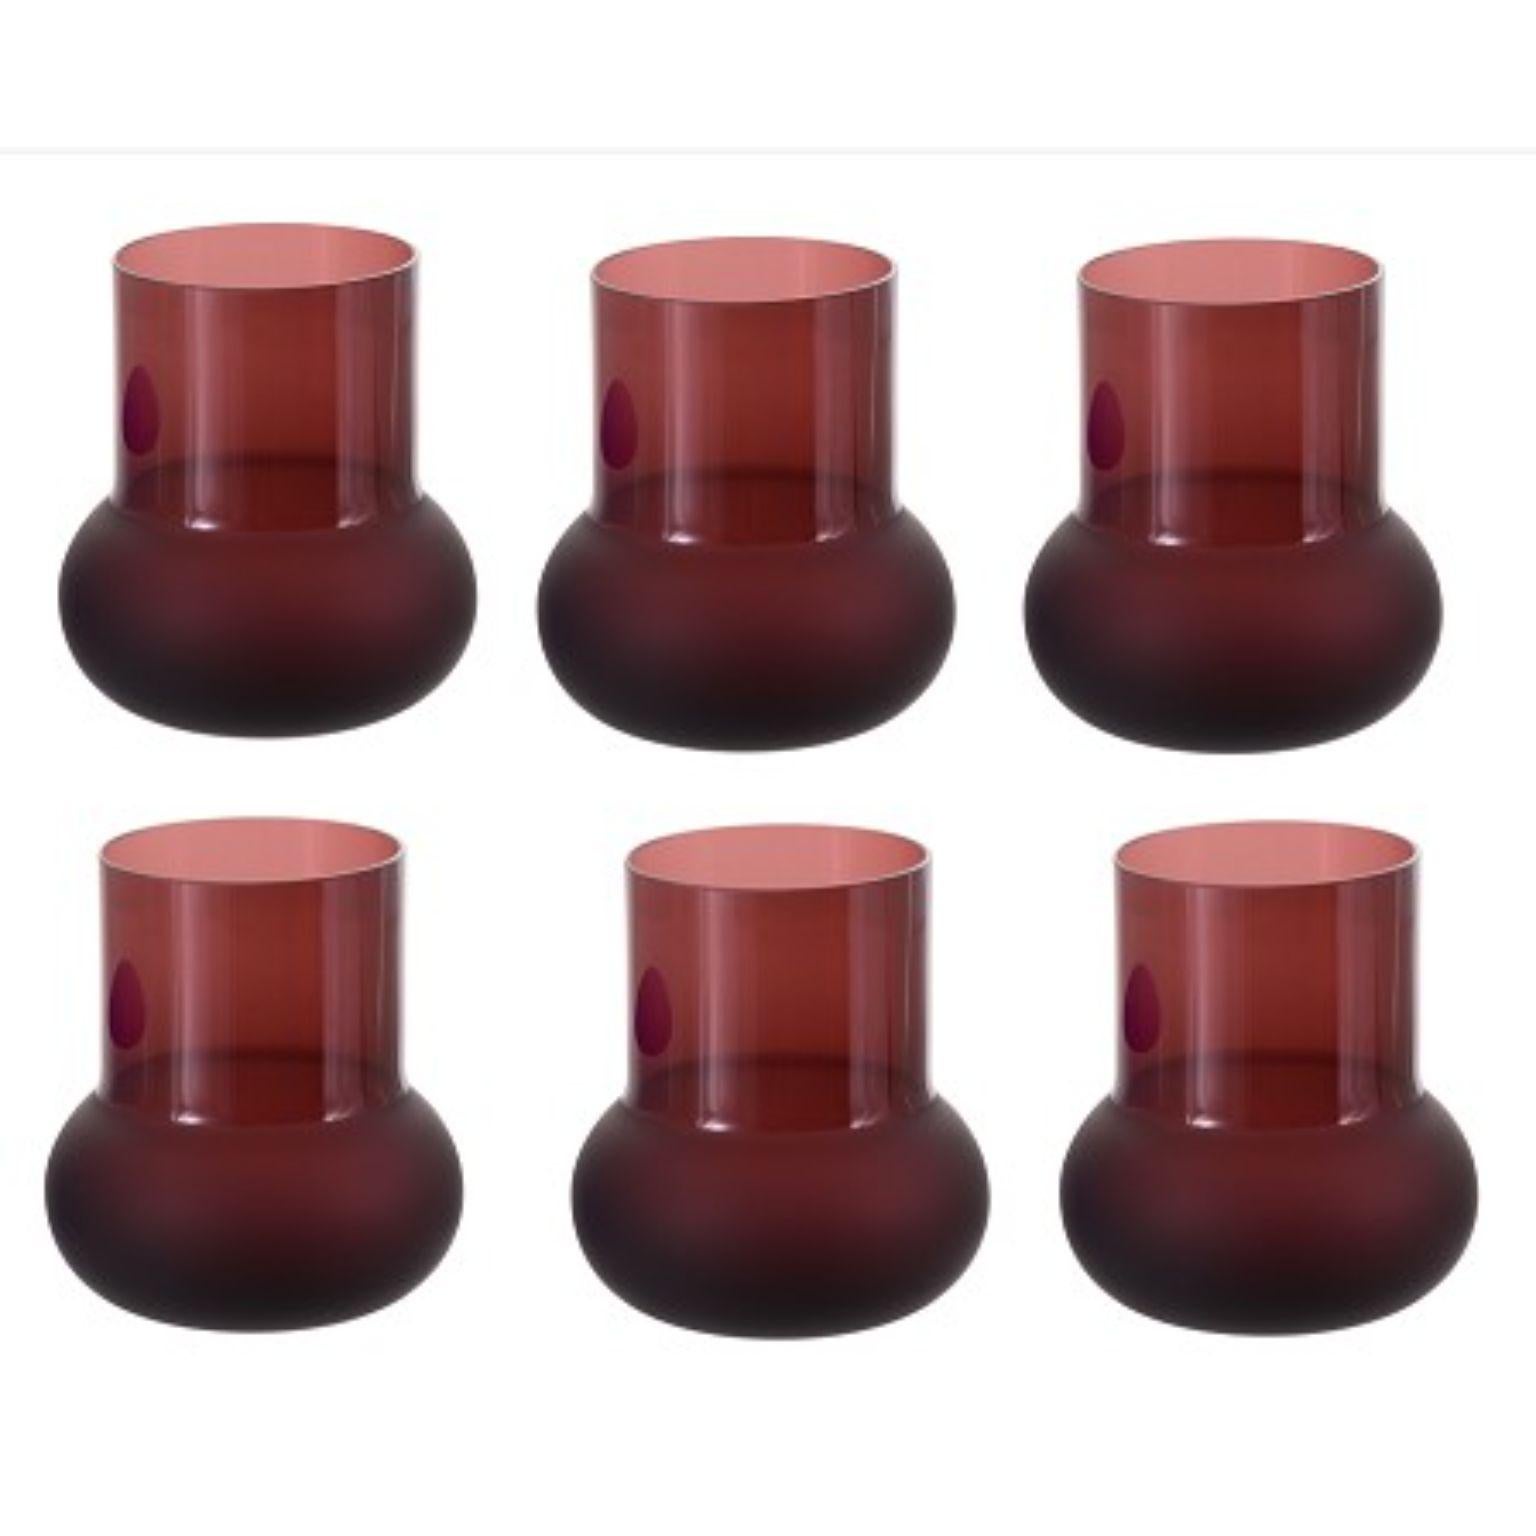 Set of 6 burgundy glasses by Pulpo
Dimensions: D10 x H11 cm
Materials: handmade glass

Pick them, pour them, roll them, and hold them; a kaleidoscope of colour, form and texture awaits. The potpourri collections by German designer Meike Harde